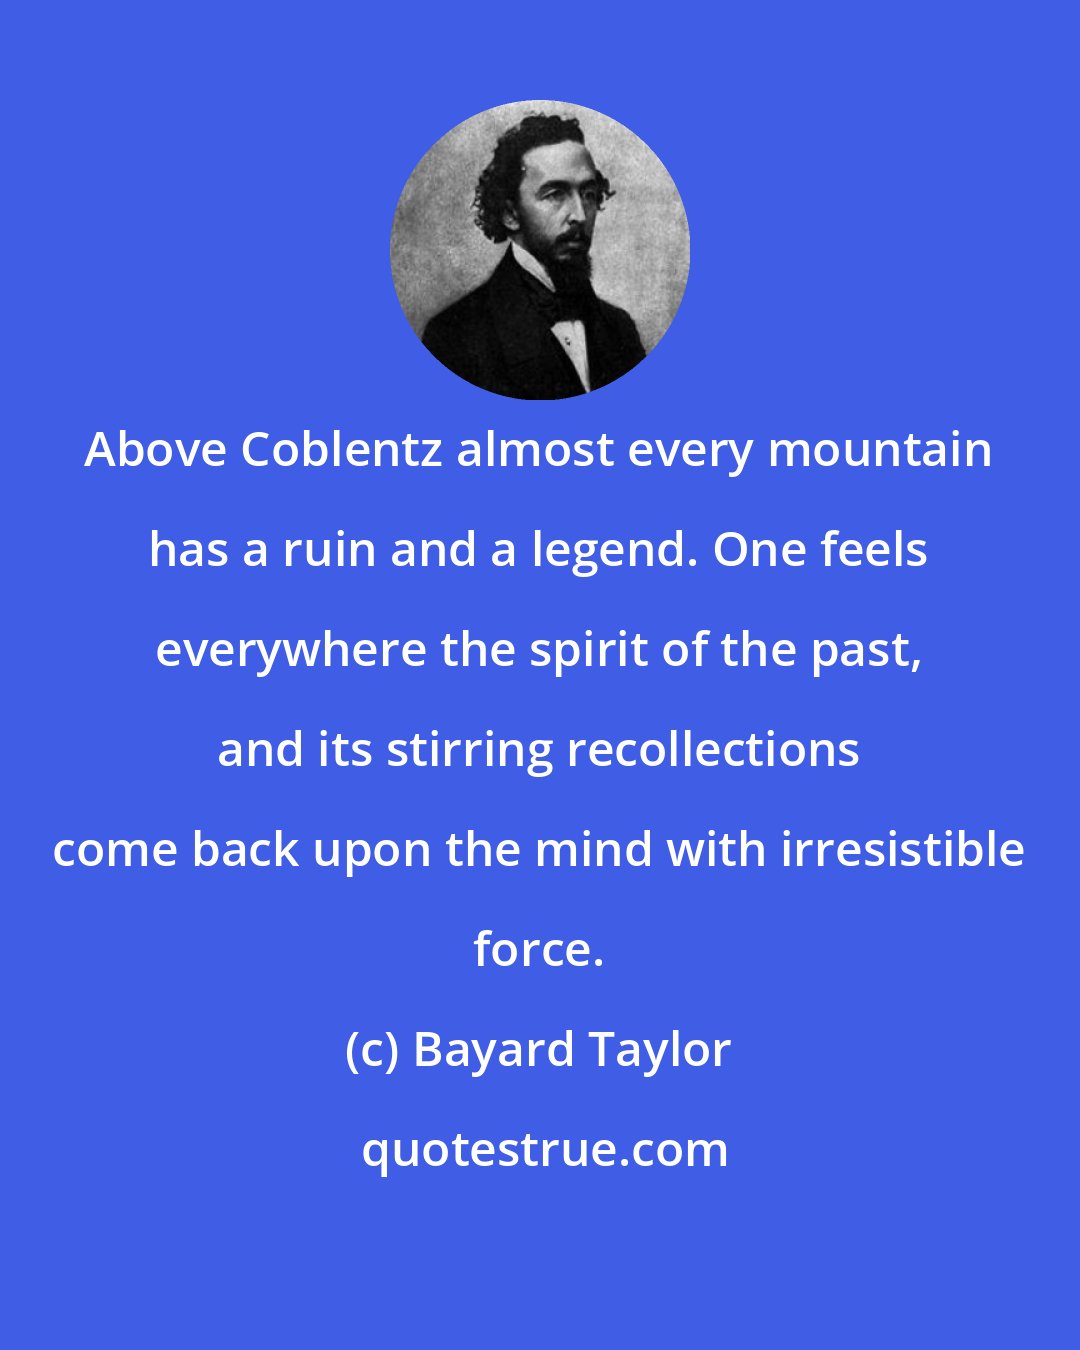 Bayard Taylor: Above Coblentz almost every mountain has a ruin and a legend. One feels everywhere the spirit of the past, and its stirring recollections come back upon the mind with irresistible force.